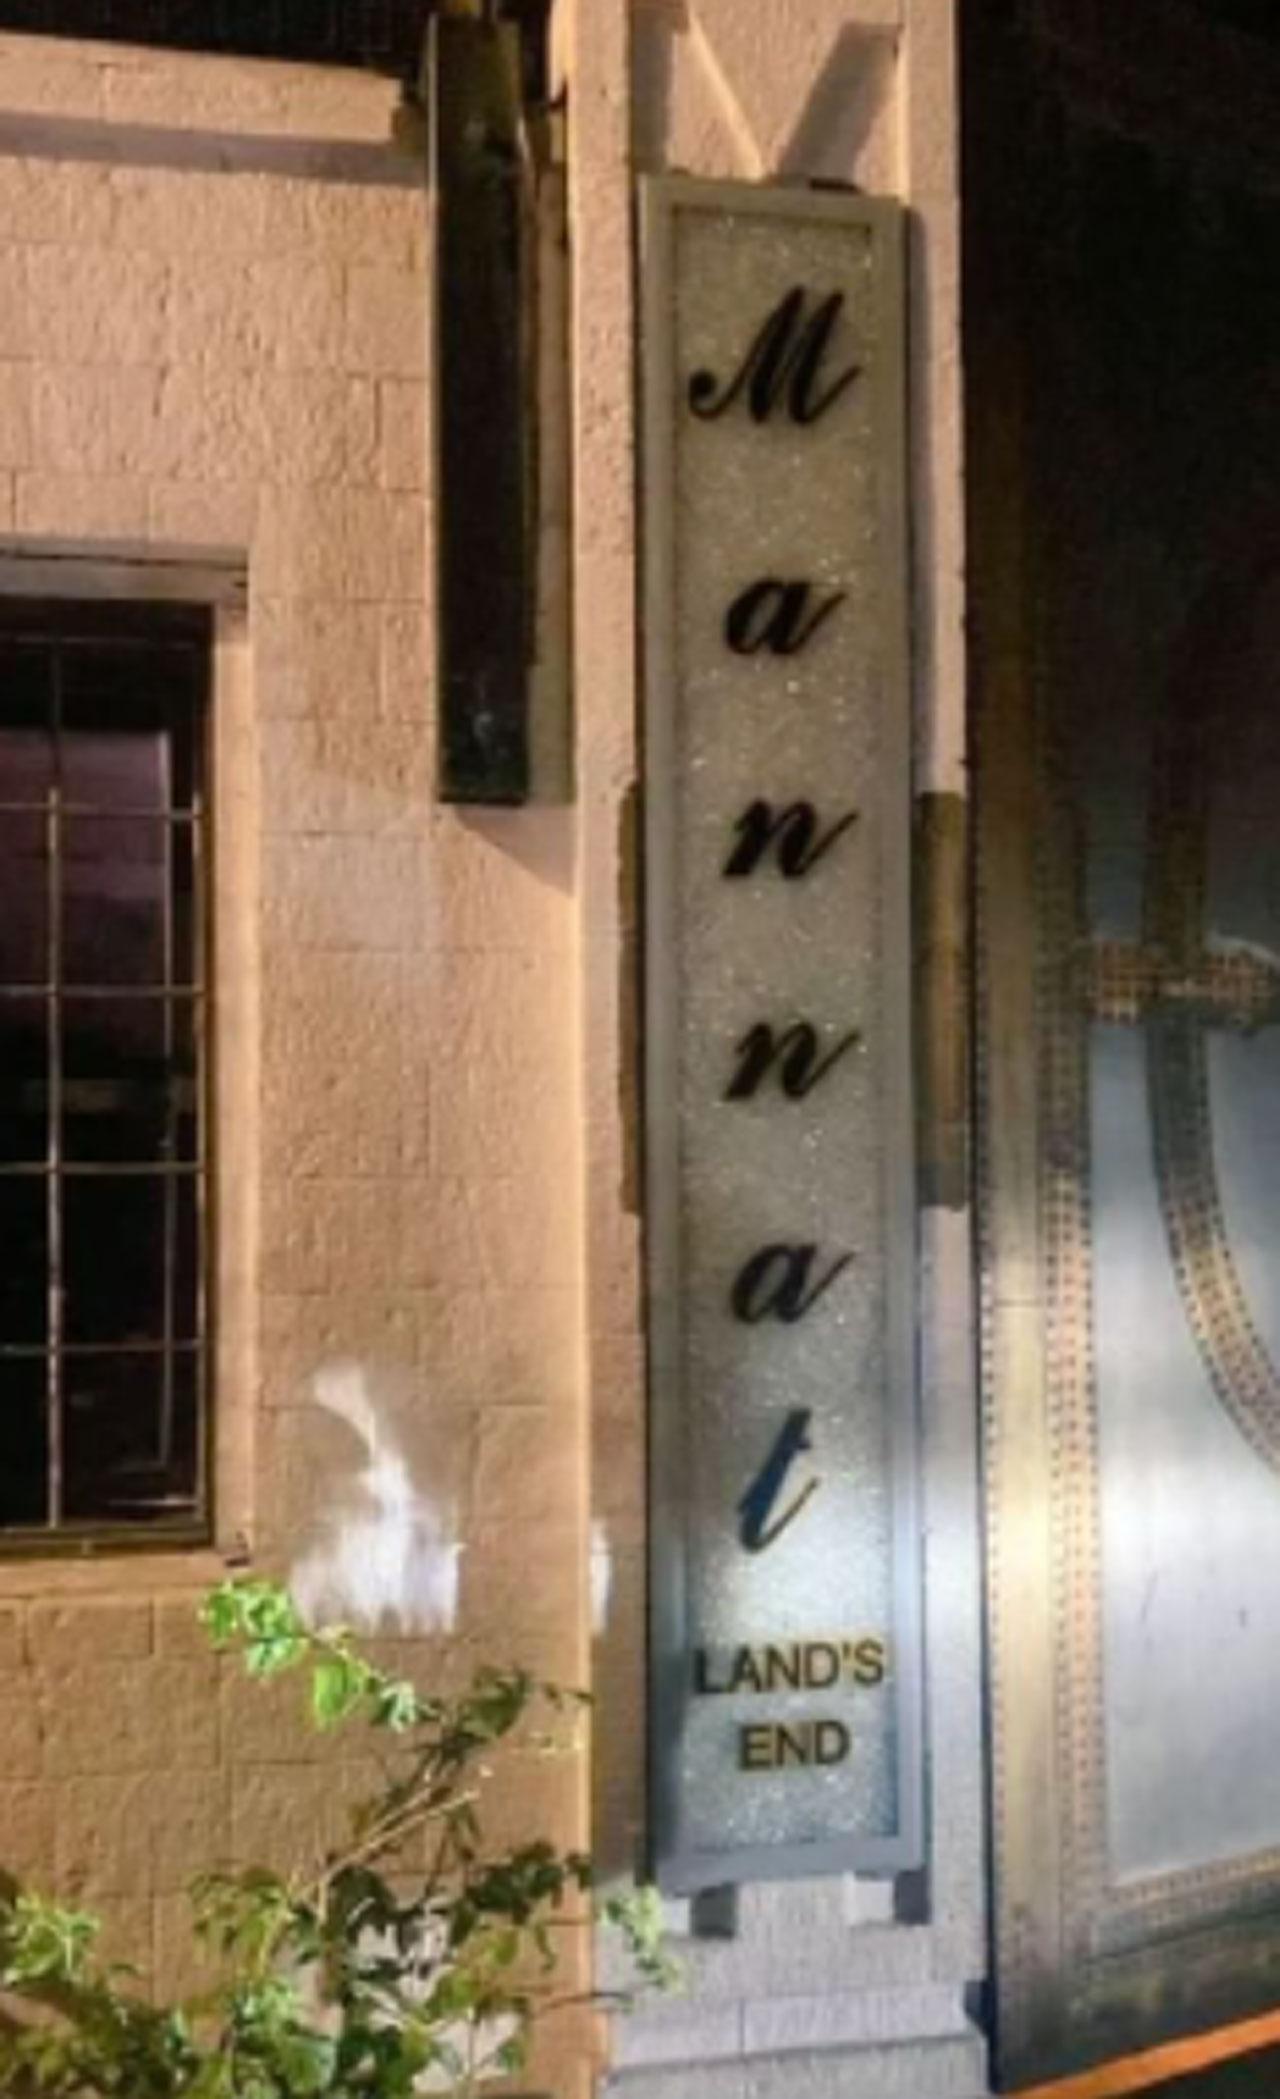 Shah Rukh Khan and Gauri Khan's sprawling abode Mannat has got a make-over but with a difference. The make-over has been given to the name plate outside the residence and reports have said it has costed the couple a staggering Rs. 25 lacs approx.